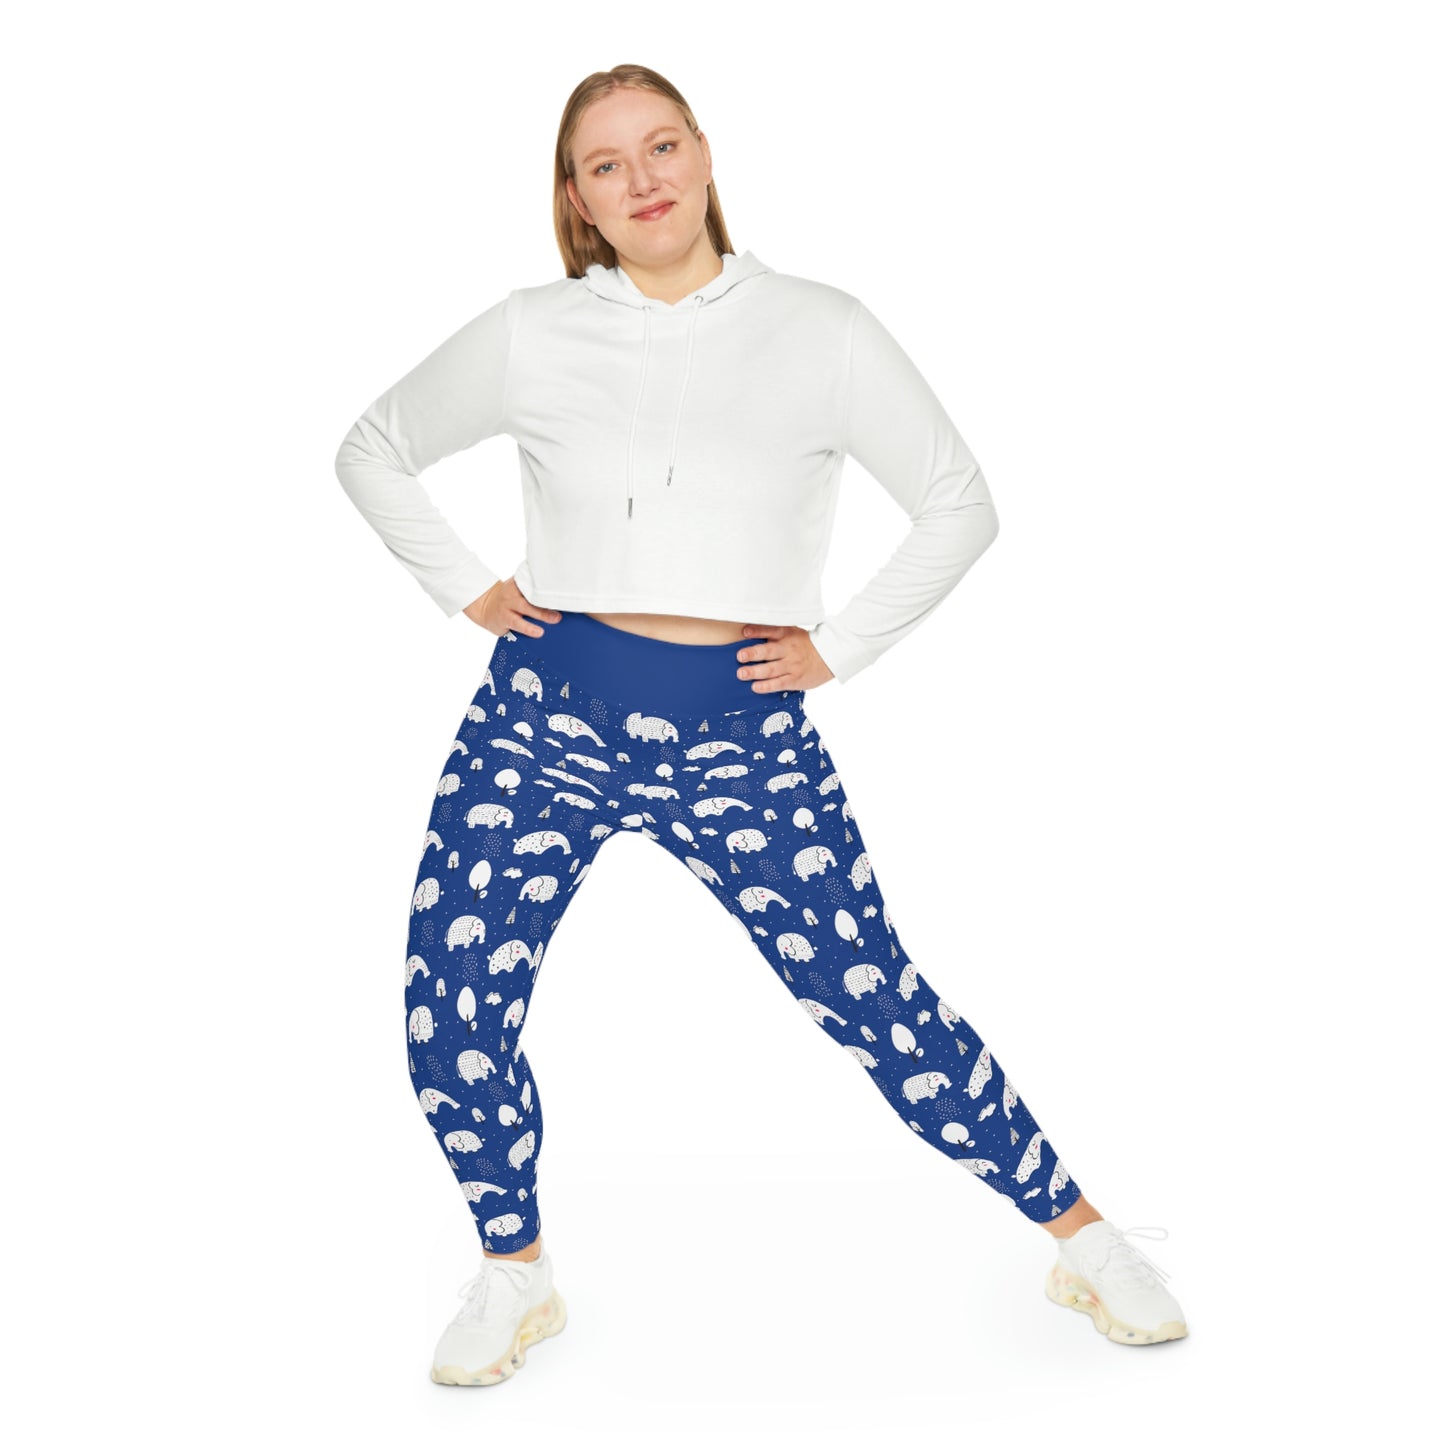 Elephant Safari Animal Plus Size Leggings One of a Kind Unique Workout Activewear tights for Mom fitness, Mothers Day, Girlfriend Christmas Gift